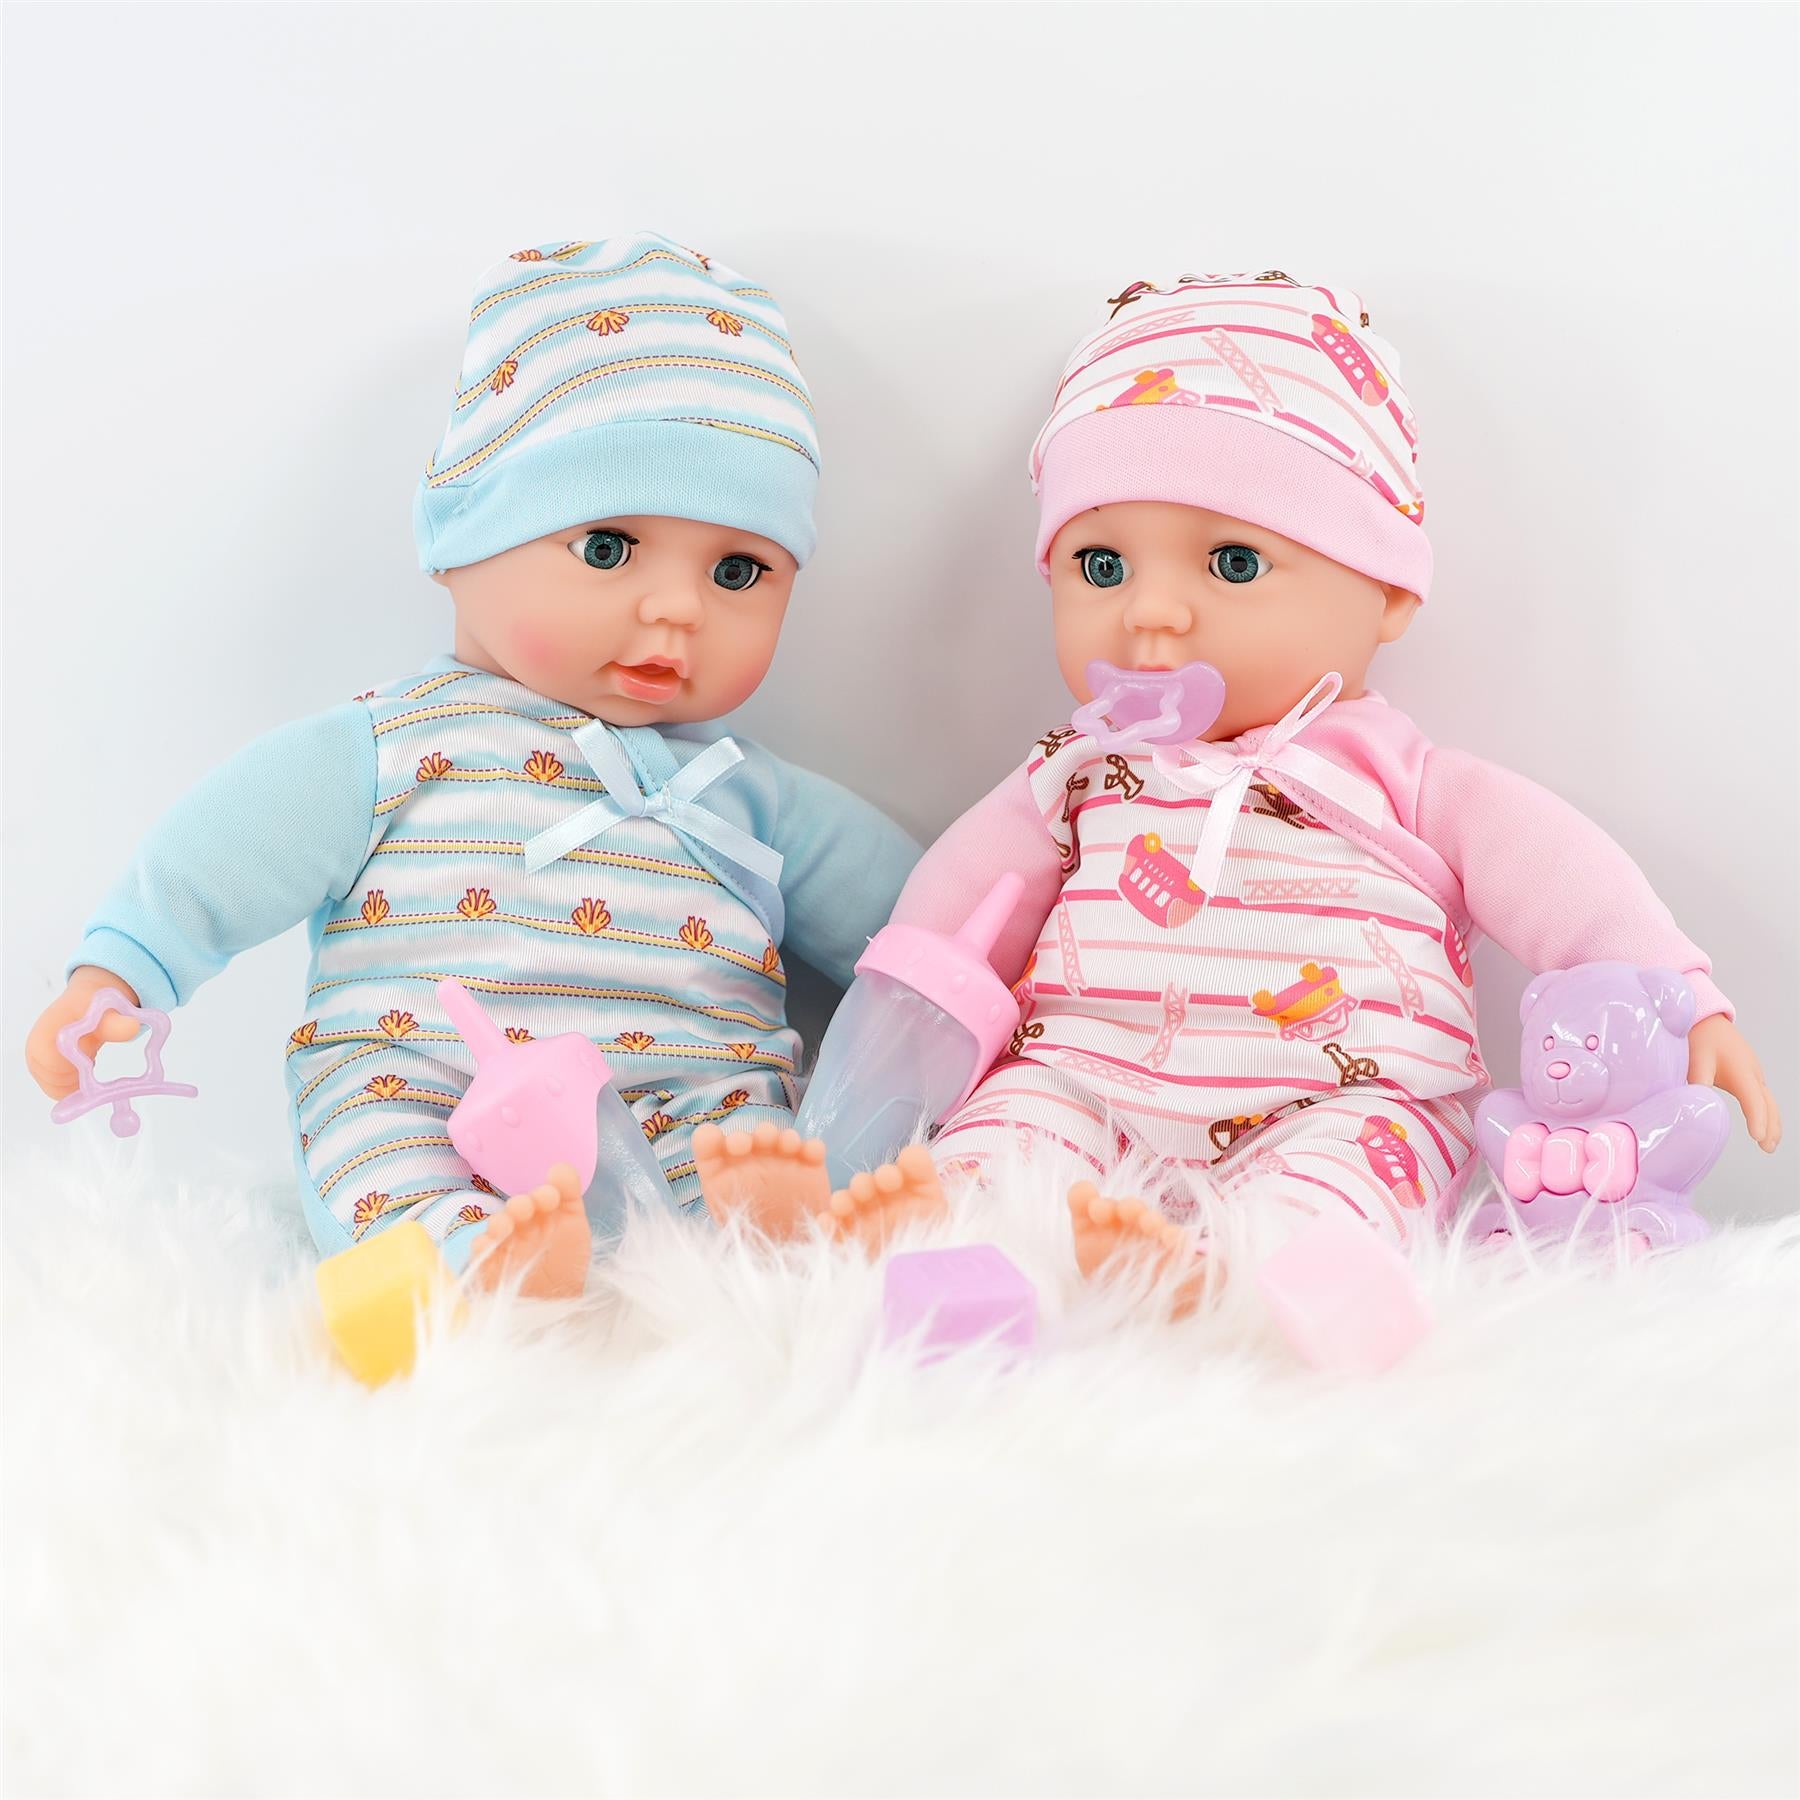 Twins Baby Girl & Boy Dolls by The Magic Toy Shop - The Magic Toy Shop